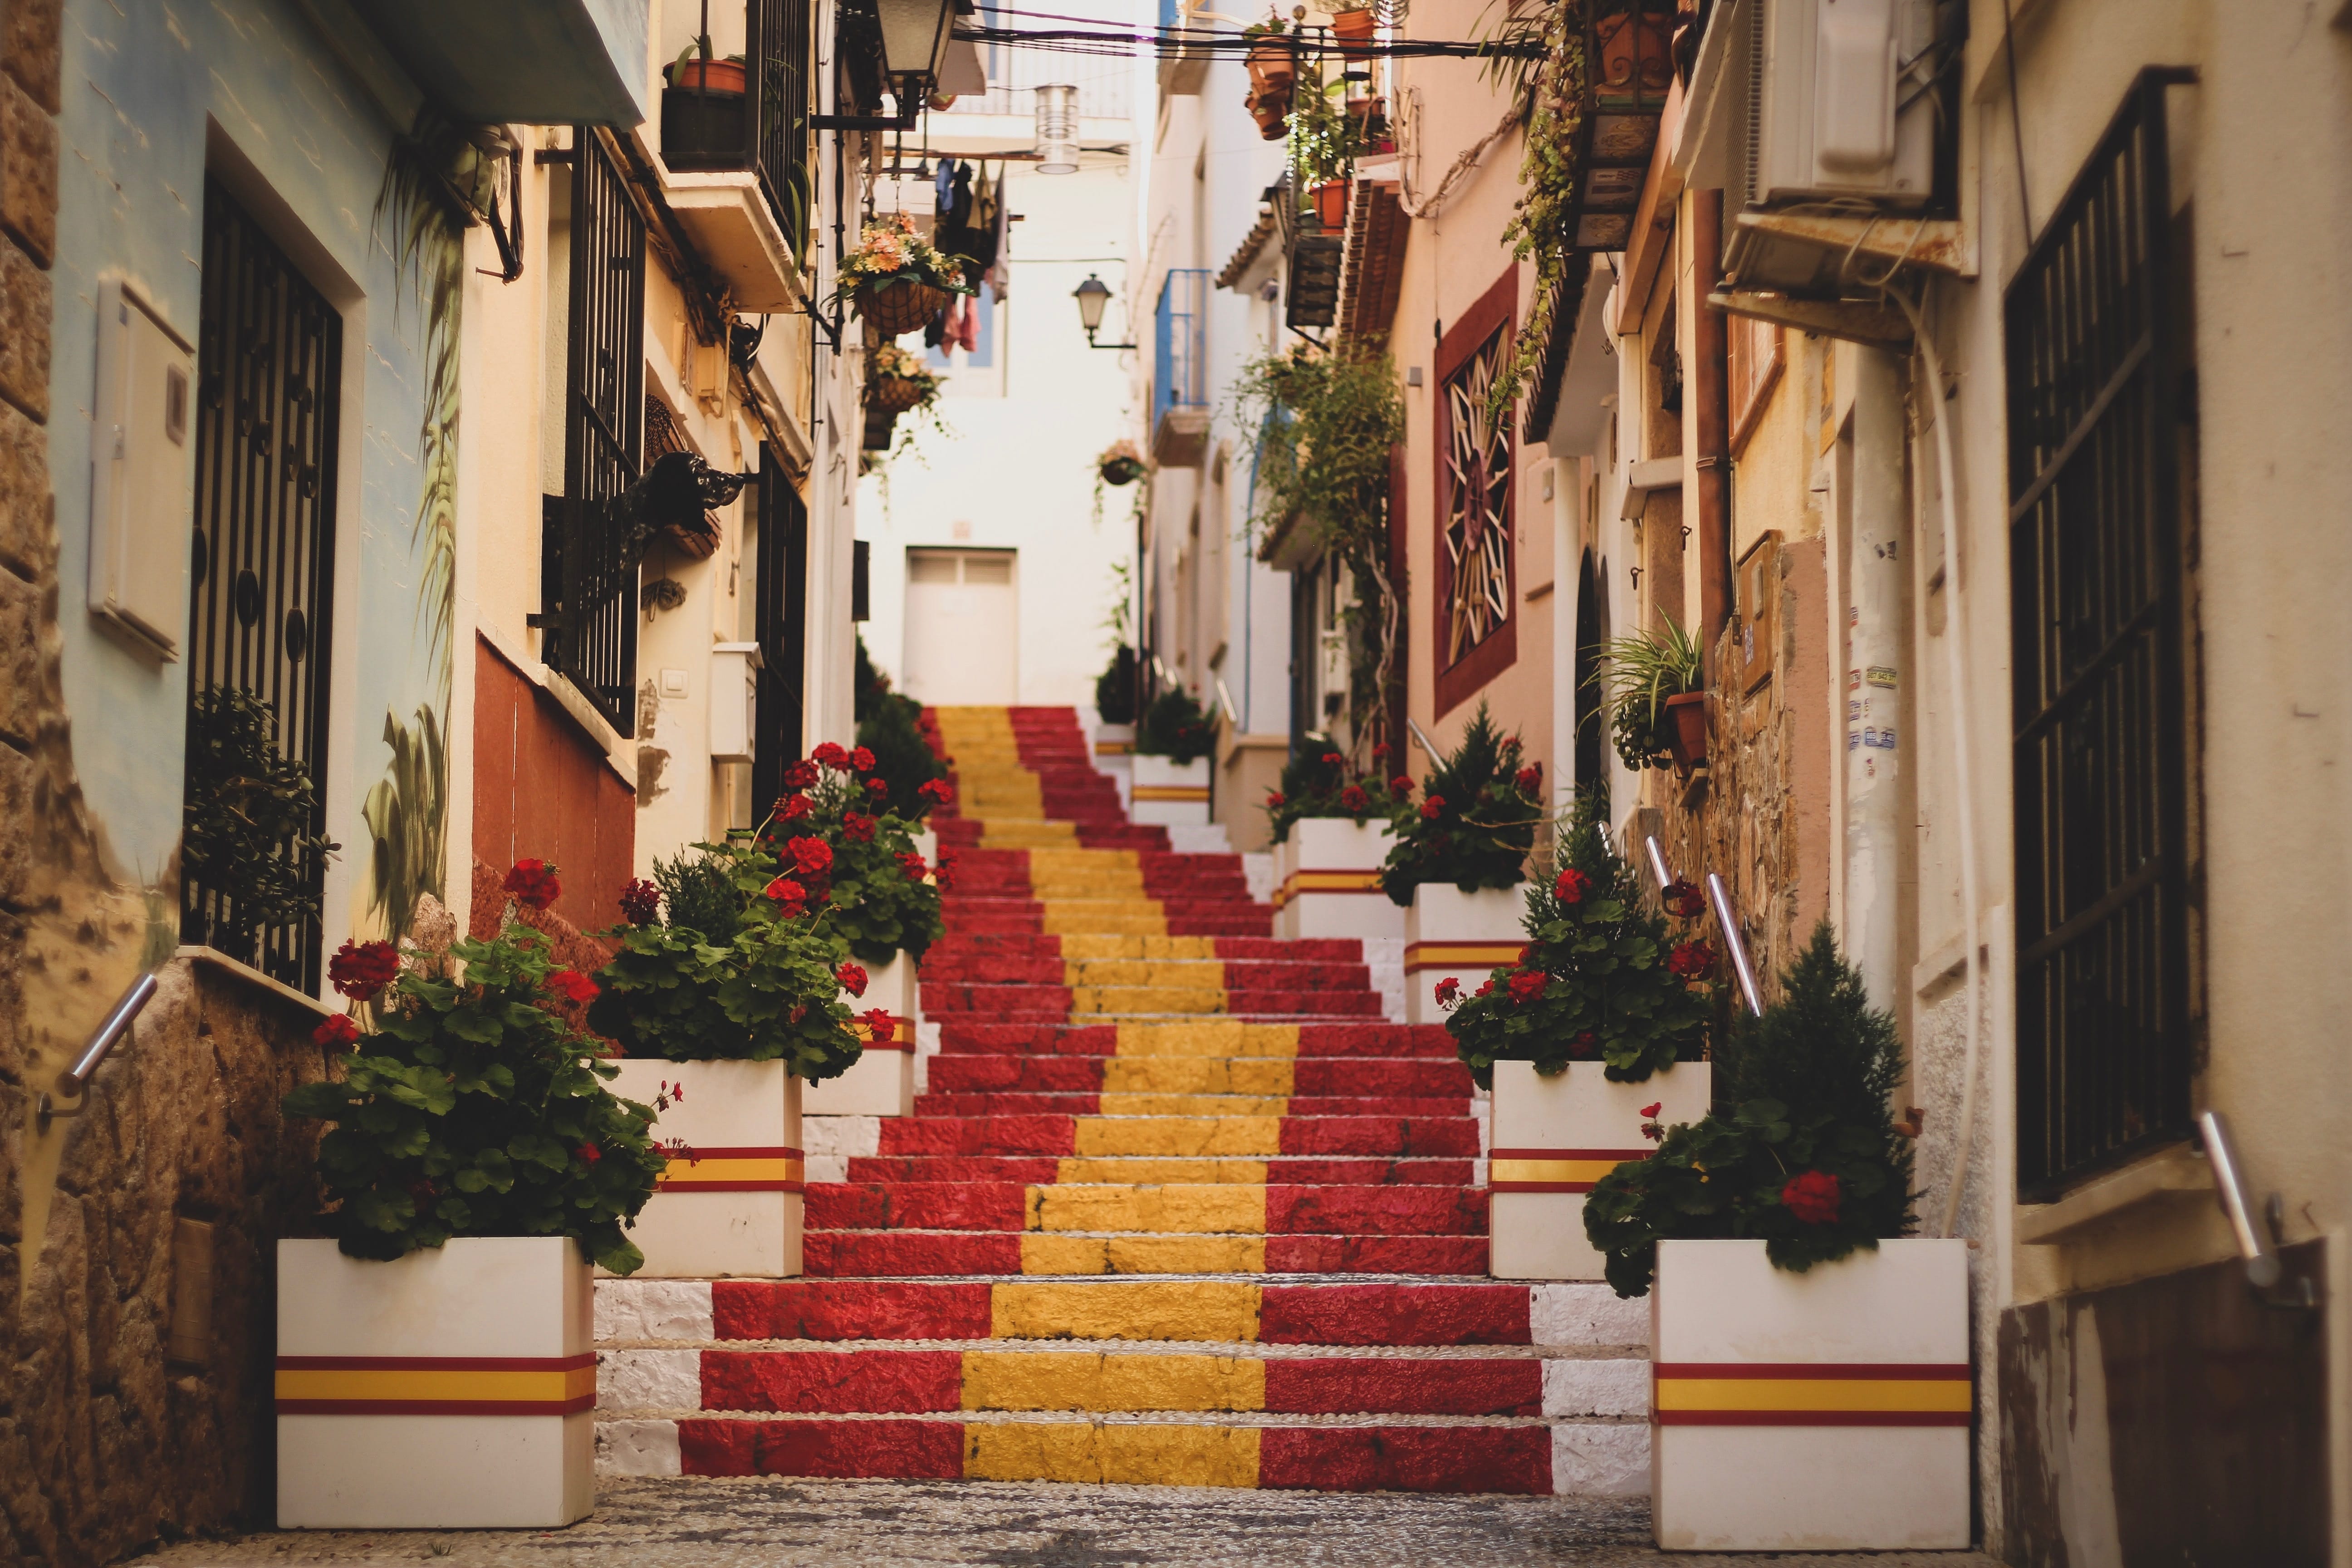 A staircase painted with the Spanish flag